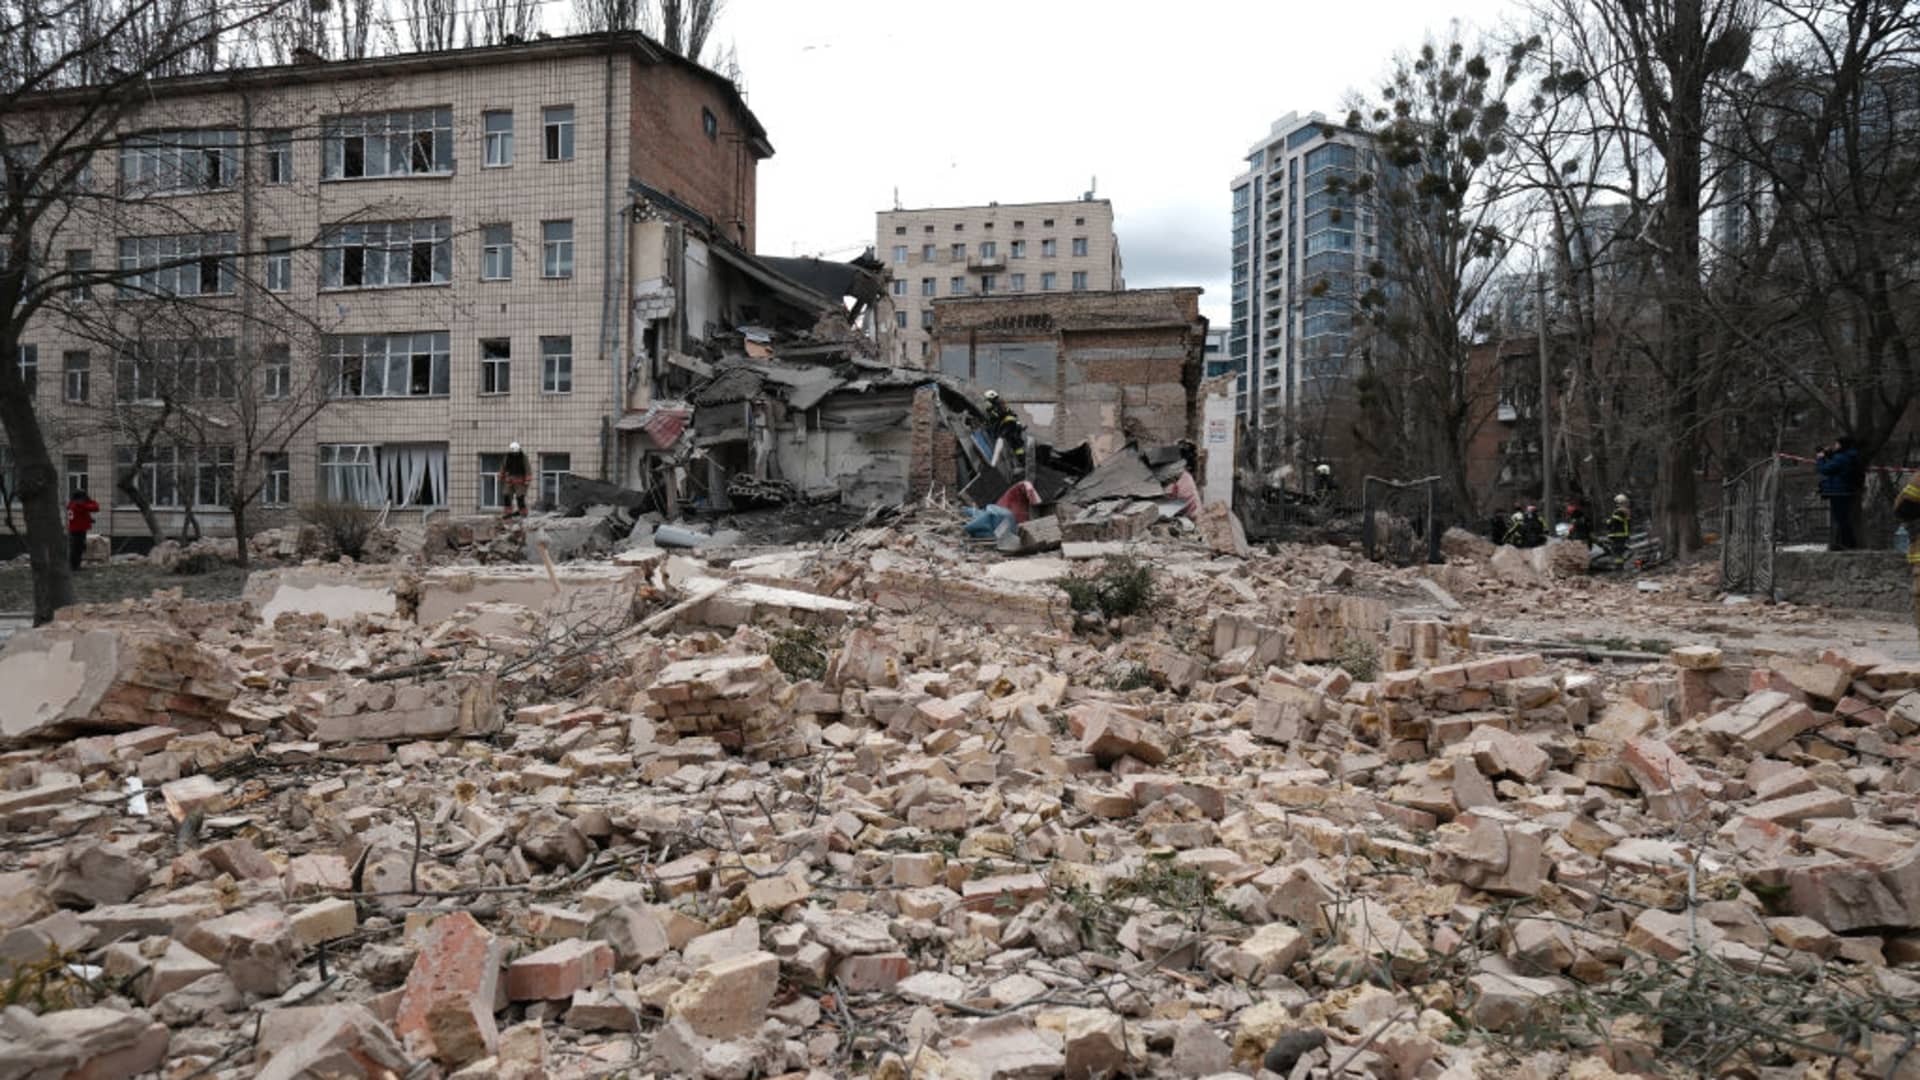 Rubble lies on the street after Russian missile attack on March 25, 2024 in Kyiv, Ukraine. Explosions rang out immediately after the air raid alert was announced. Debris of downed Russian missiles fell in several areas of the city. Russian forces struck Kyiv with two ballistic missiles from the occupied Crimea. 